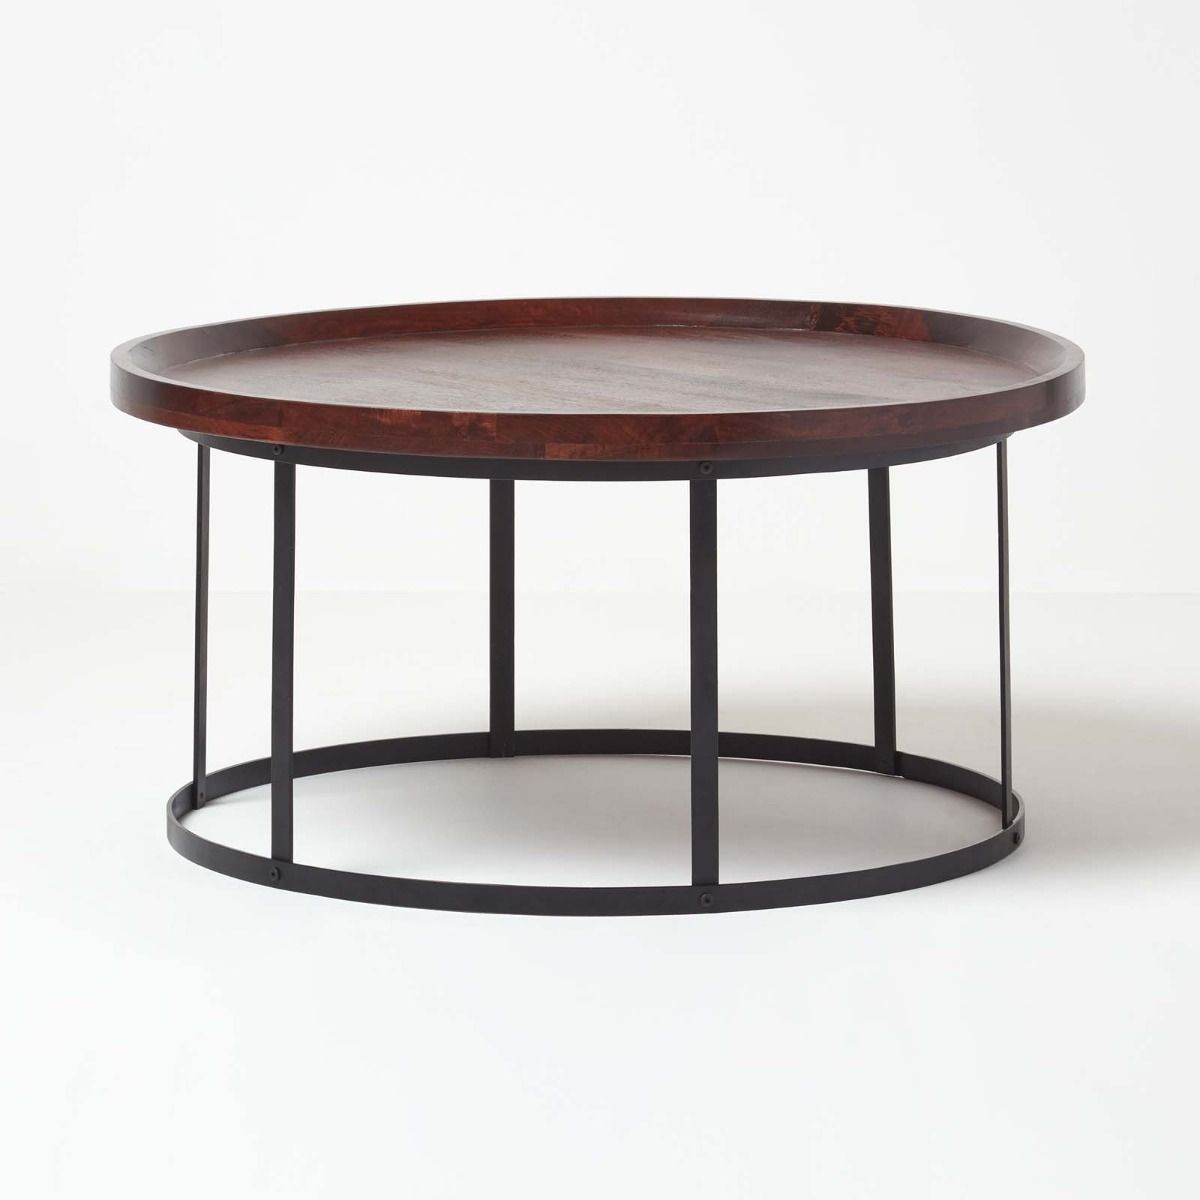 Industrial Round Coffee Table With Dark Wood Top And Steel Frame Within Round Coffee Tables With Steel Frames (View 14 of 15)